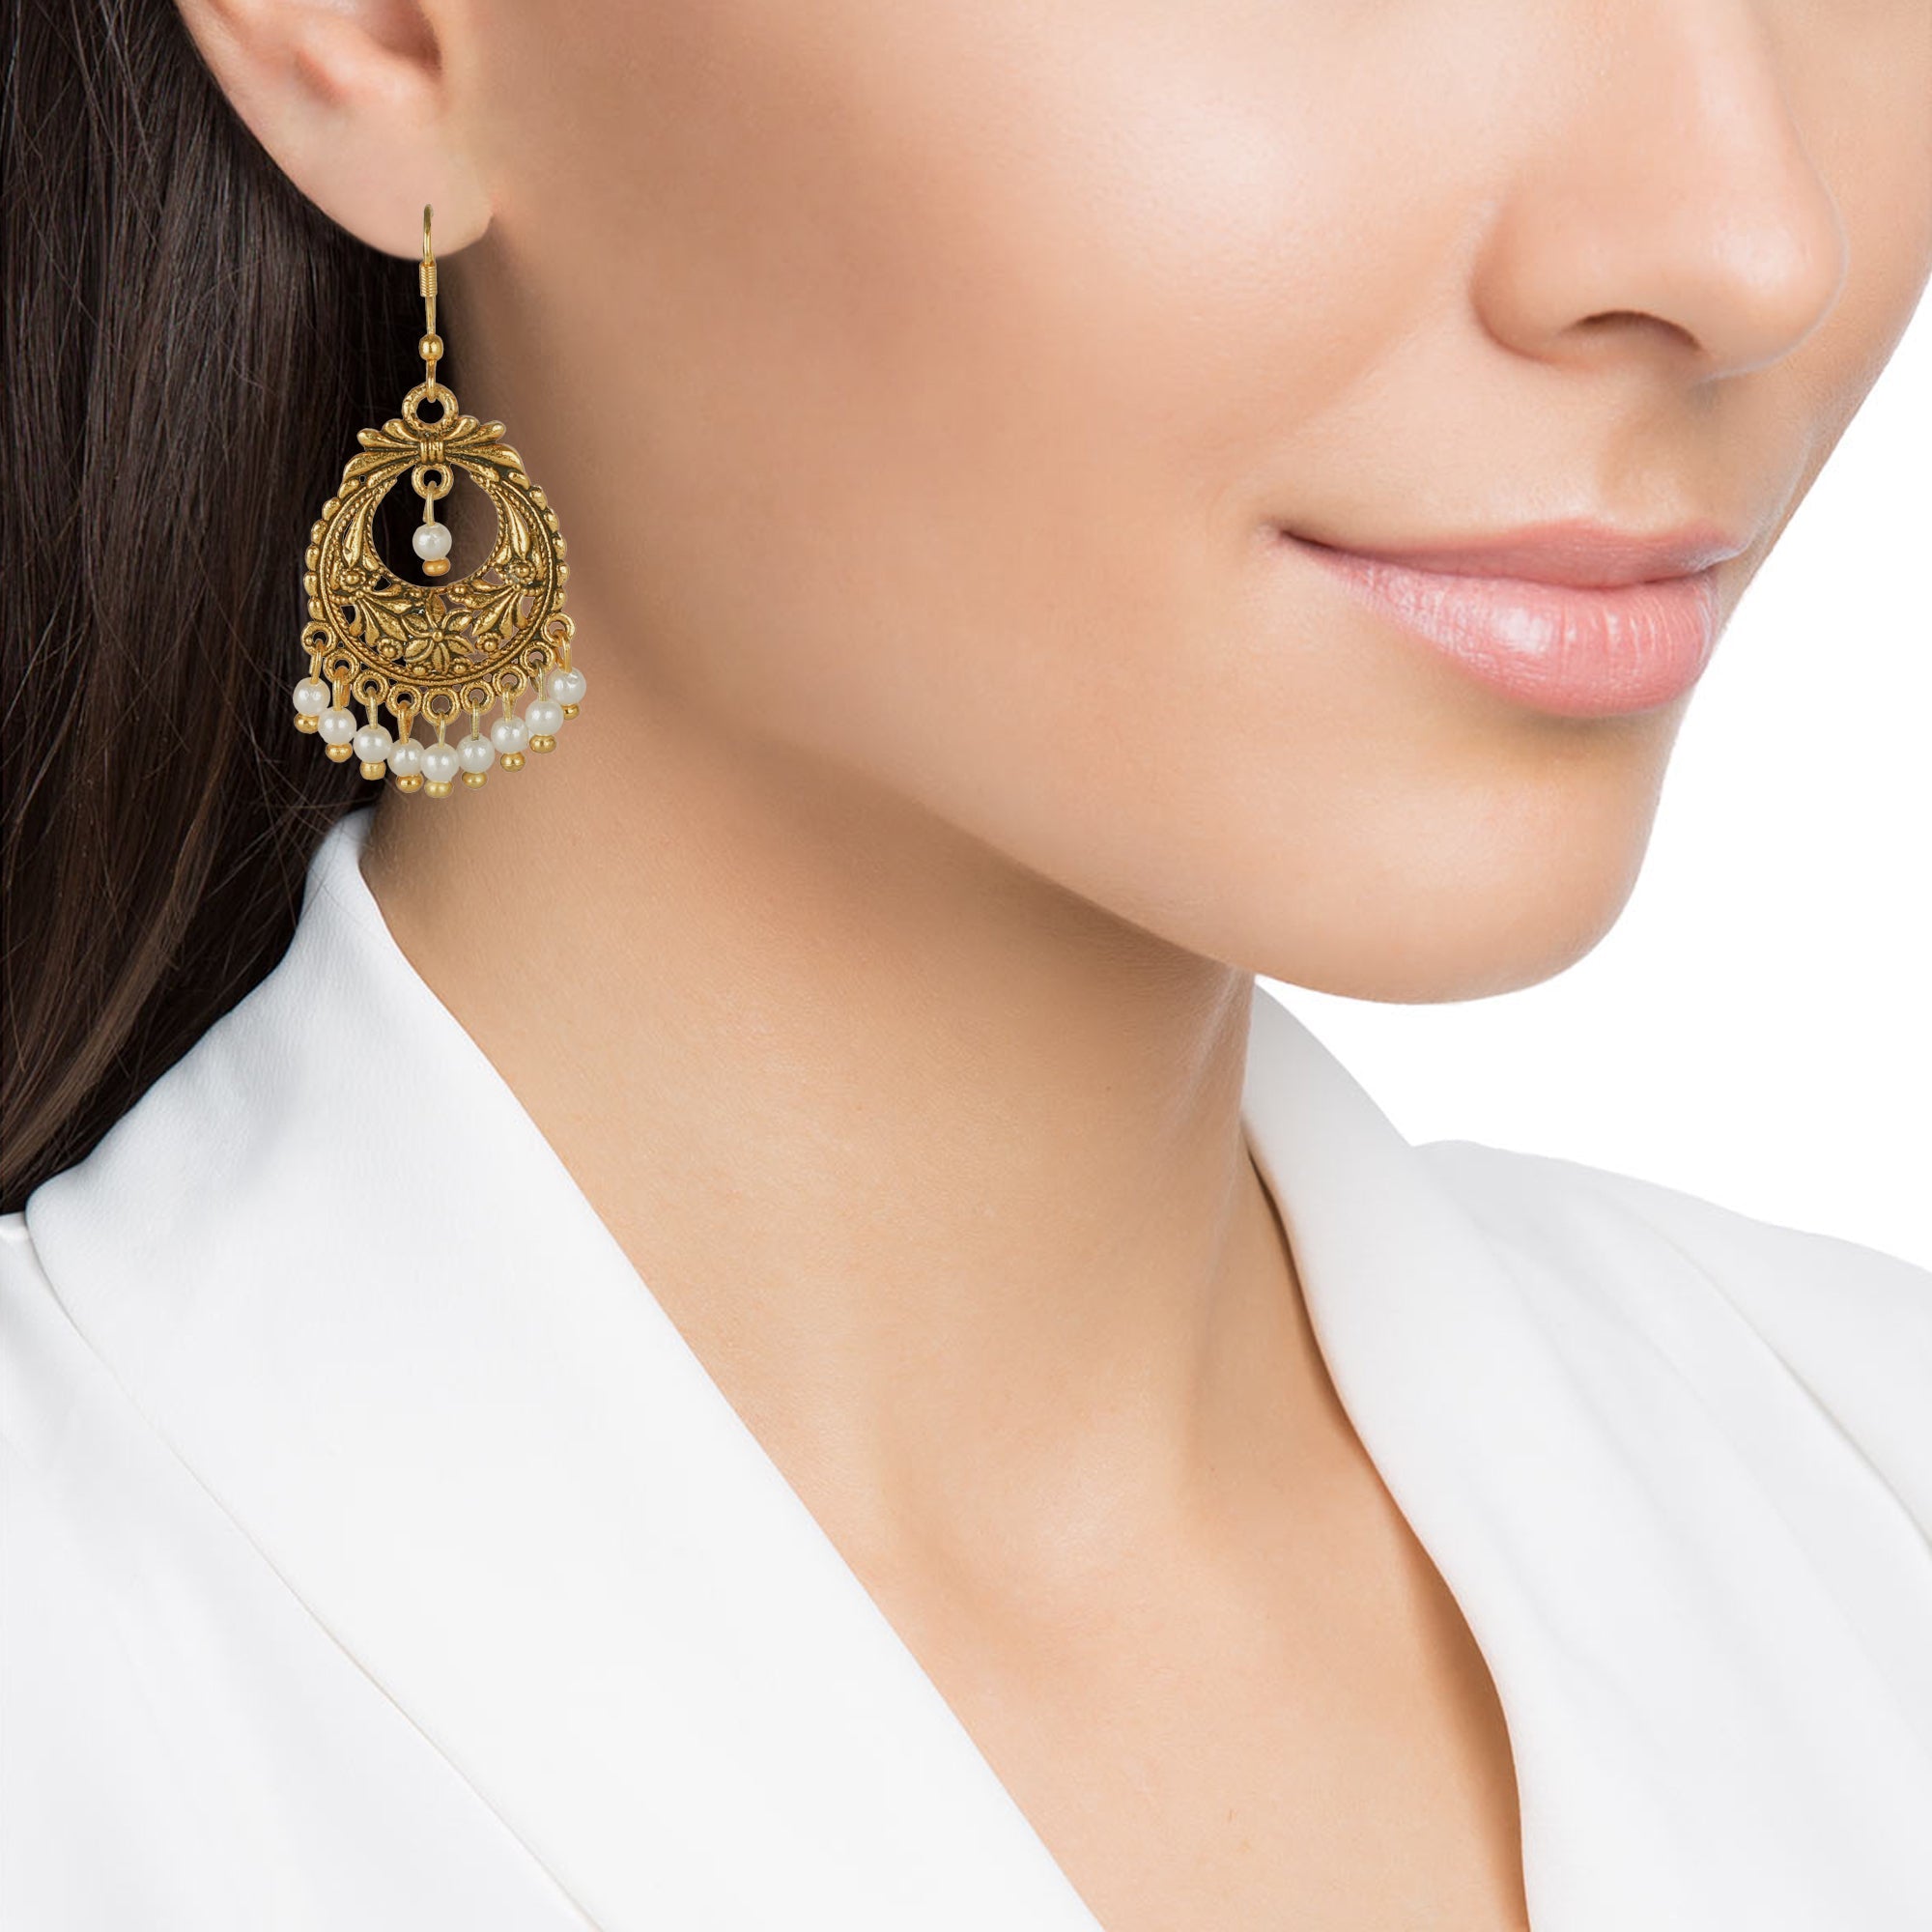 7 Top Lightweight Gold Earrings Designs for Daily Use [2023]